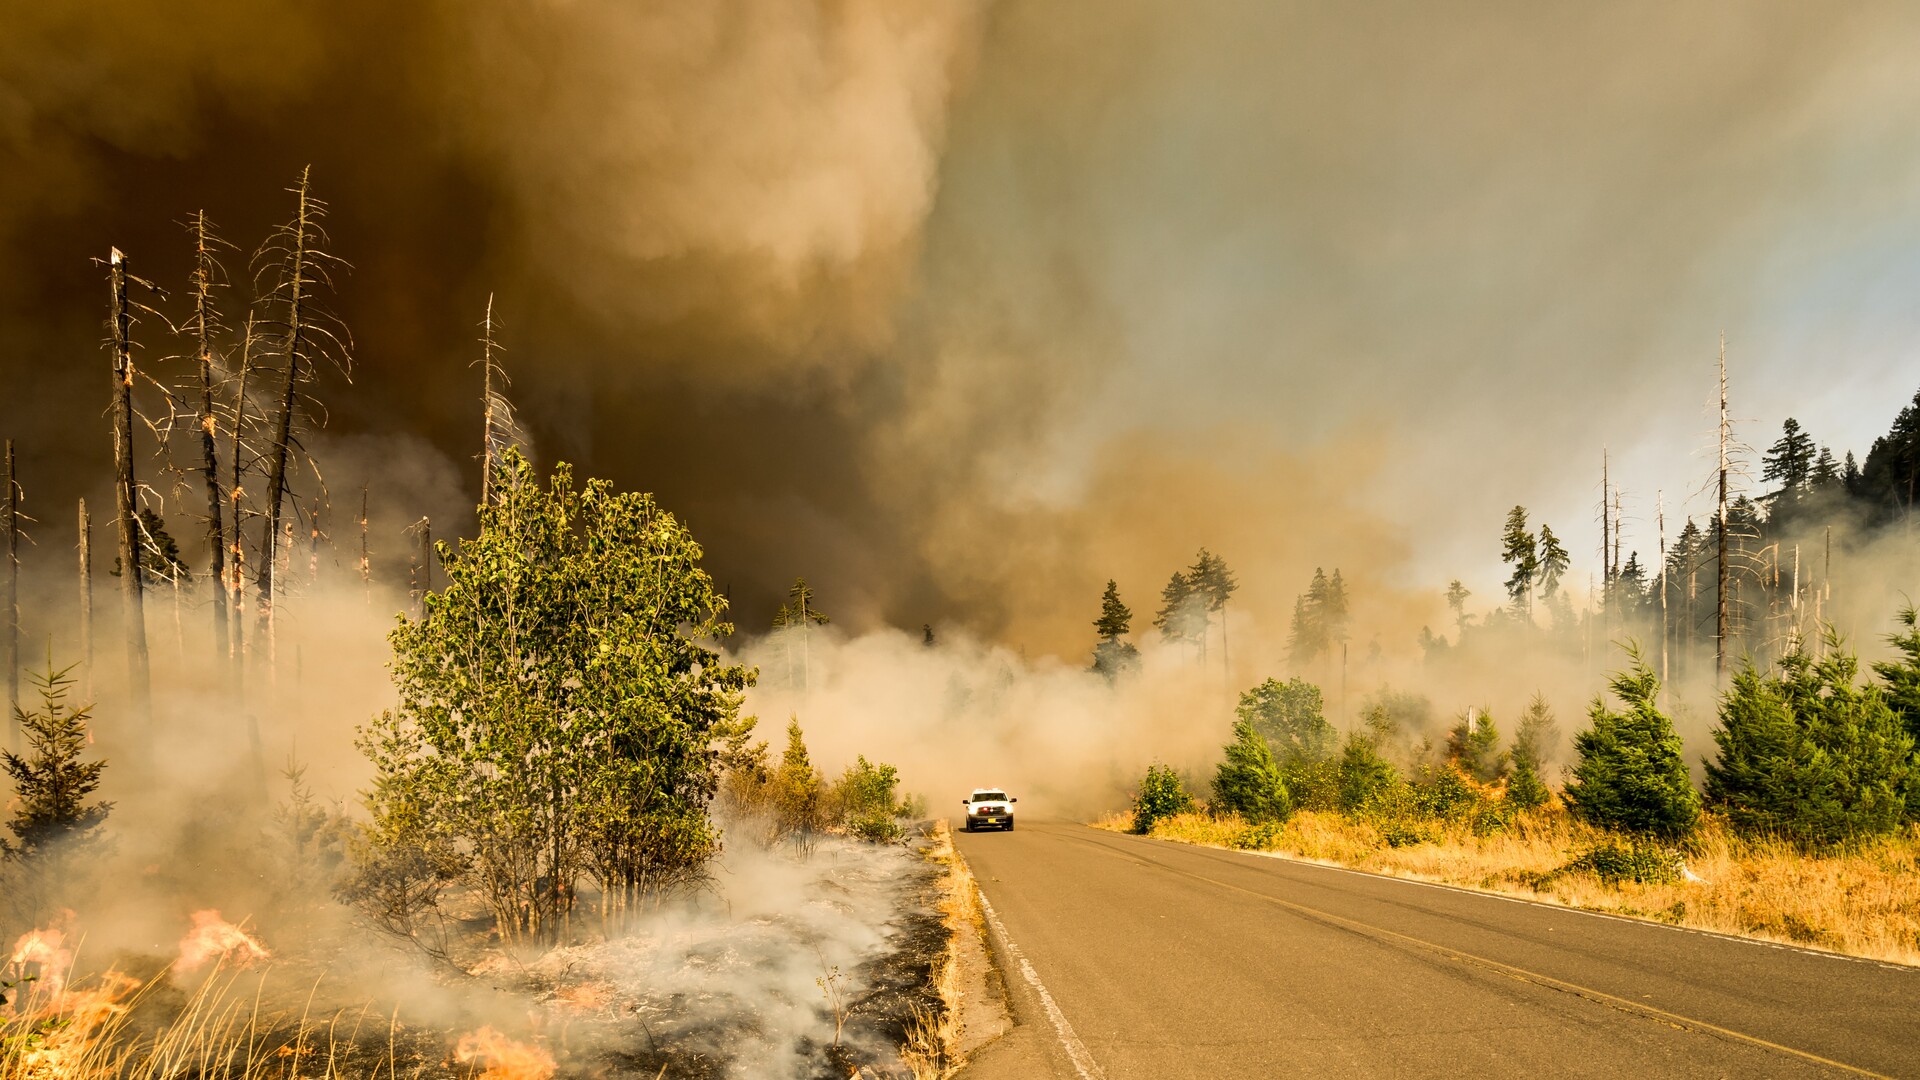 Wildfire Season is Here... Are You Prepared?